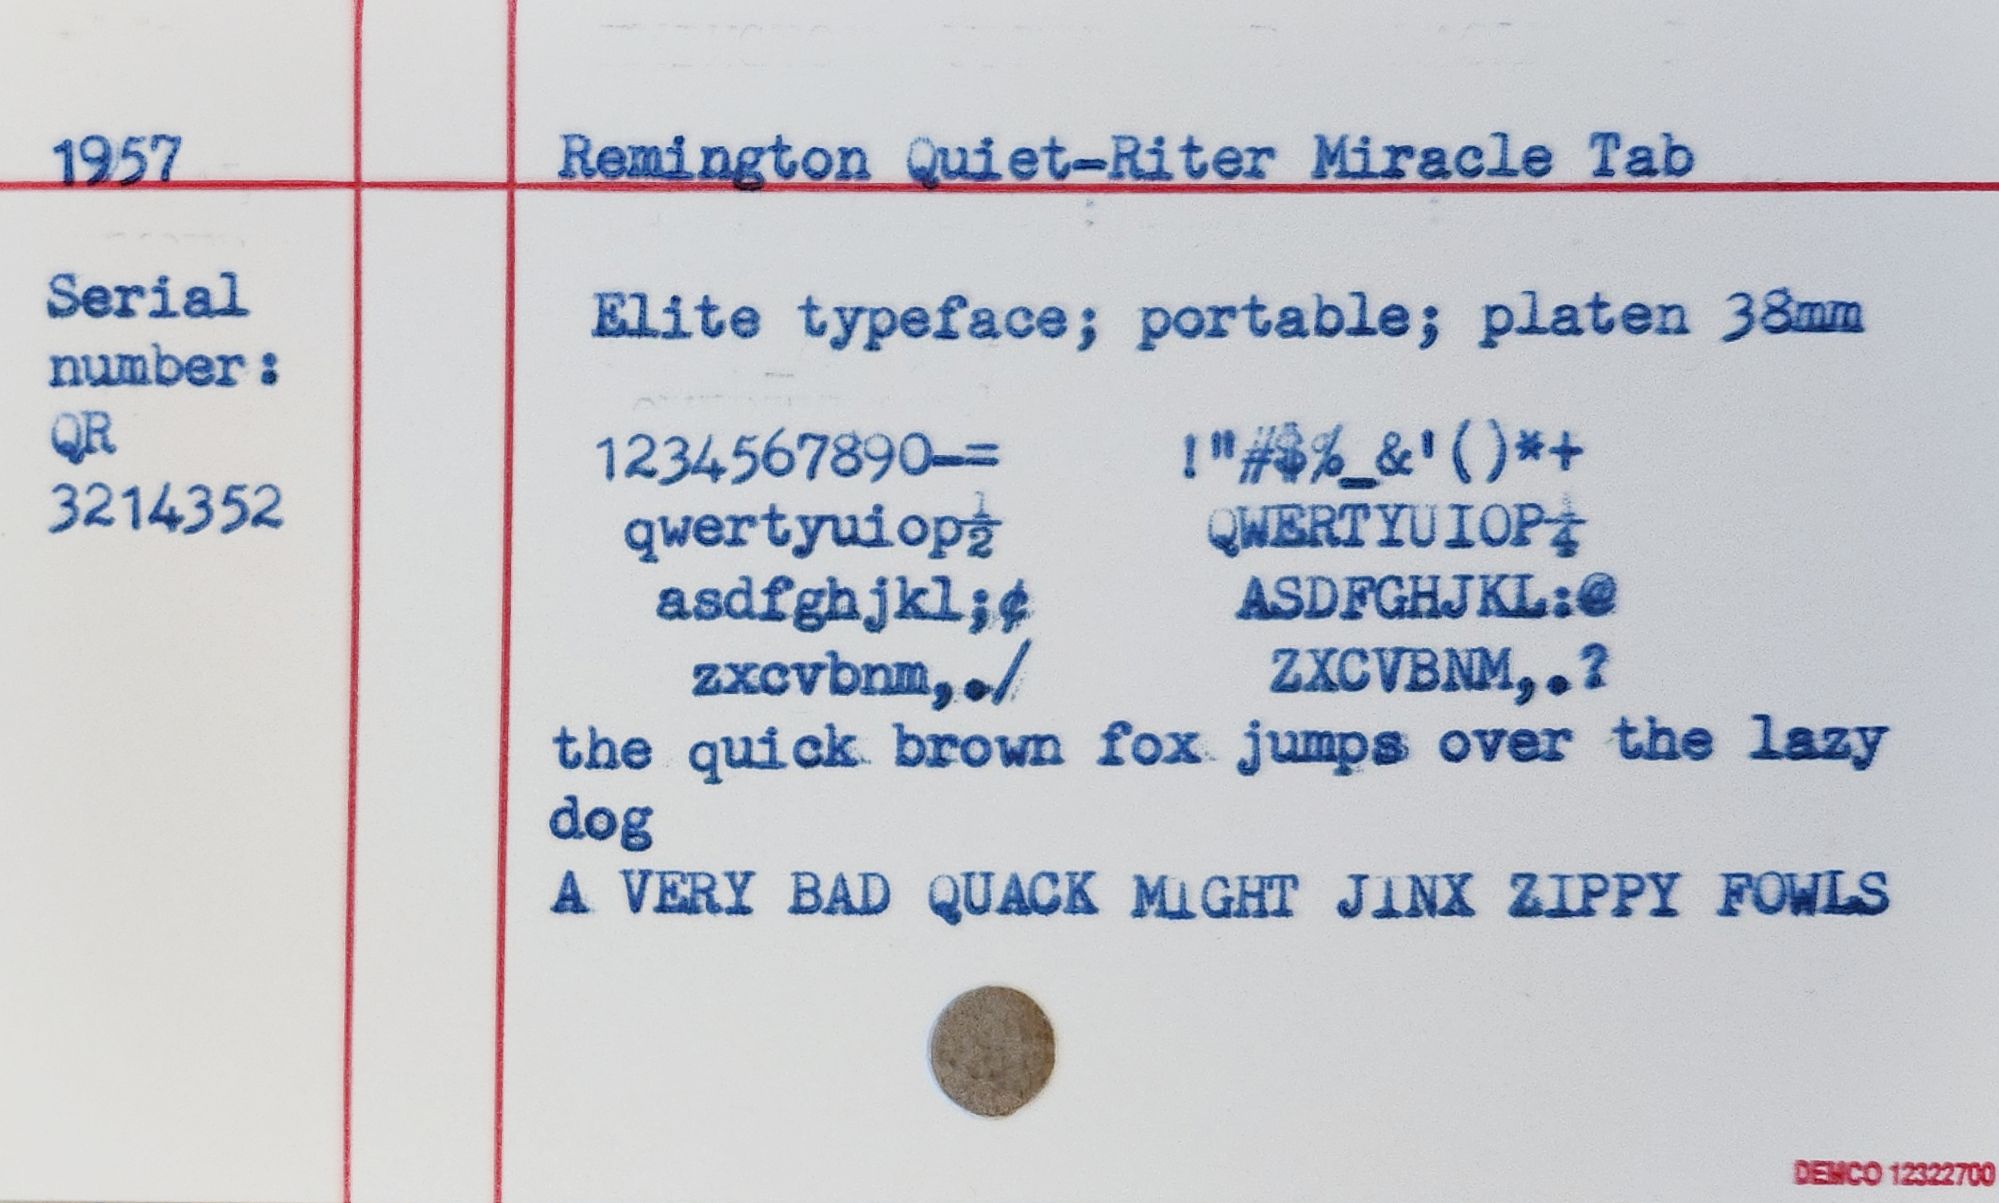 Typed library card catalog card that reads: 1957 Remington Quiet-Riter Miracle Tab Serial number: QR 3214352 Elite typeface; portable; platen 38mm 1234567890-= !"#$%&amp;'()*+ qwertyuiop asdfghjkl; zxcvbnm,./ QWERTYUIOP ASDFGHJKL:@ ZXCVBNM,.? the quick brown fox jumps over the lazy dog A VERY BAD QUACK MIGHT JINX ZIPPY FOWLS